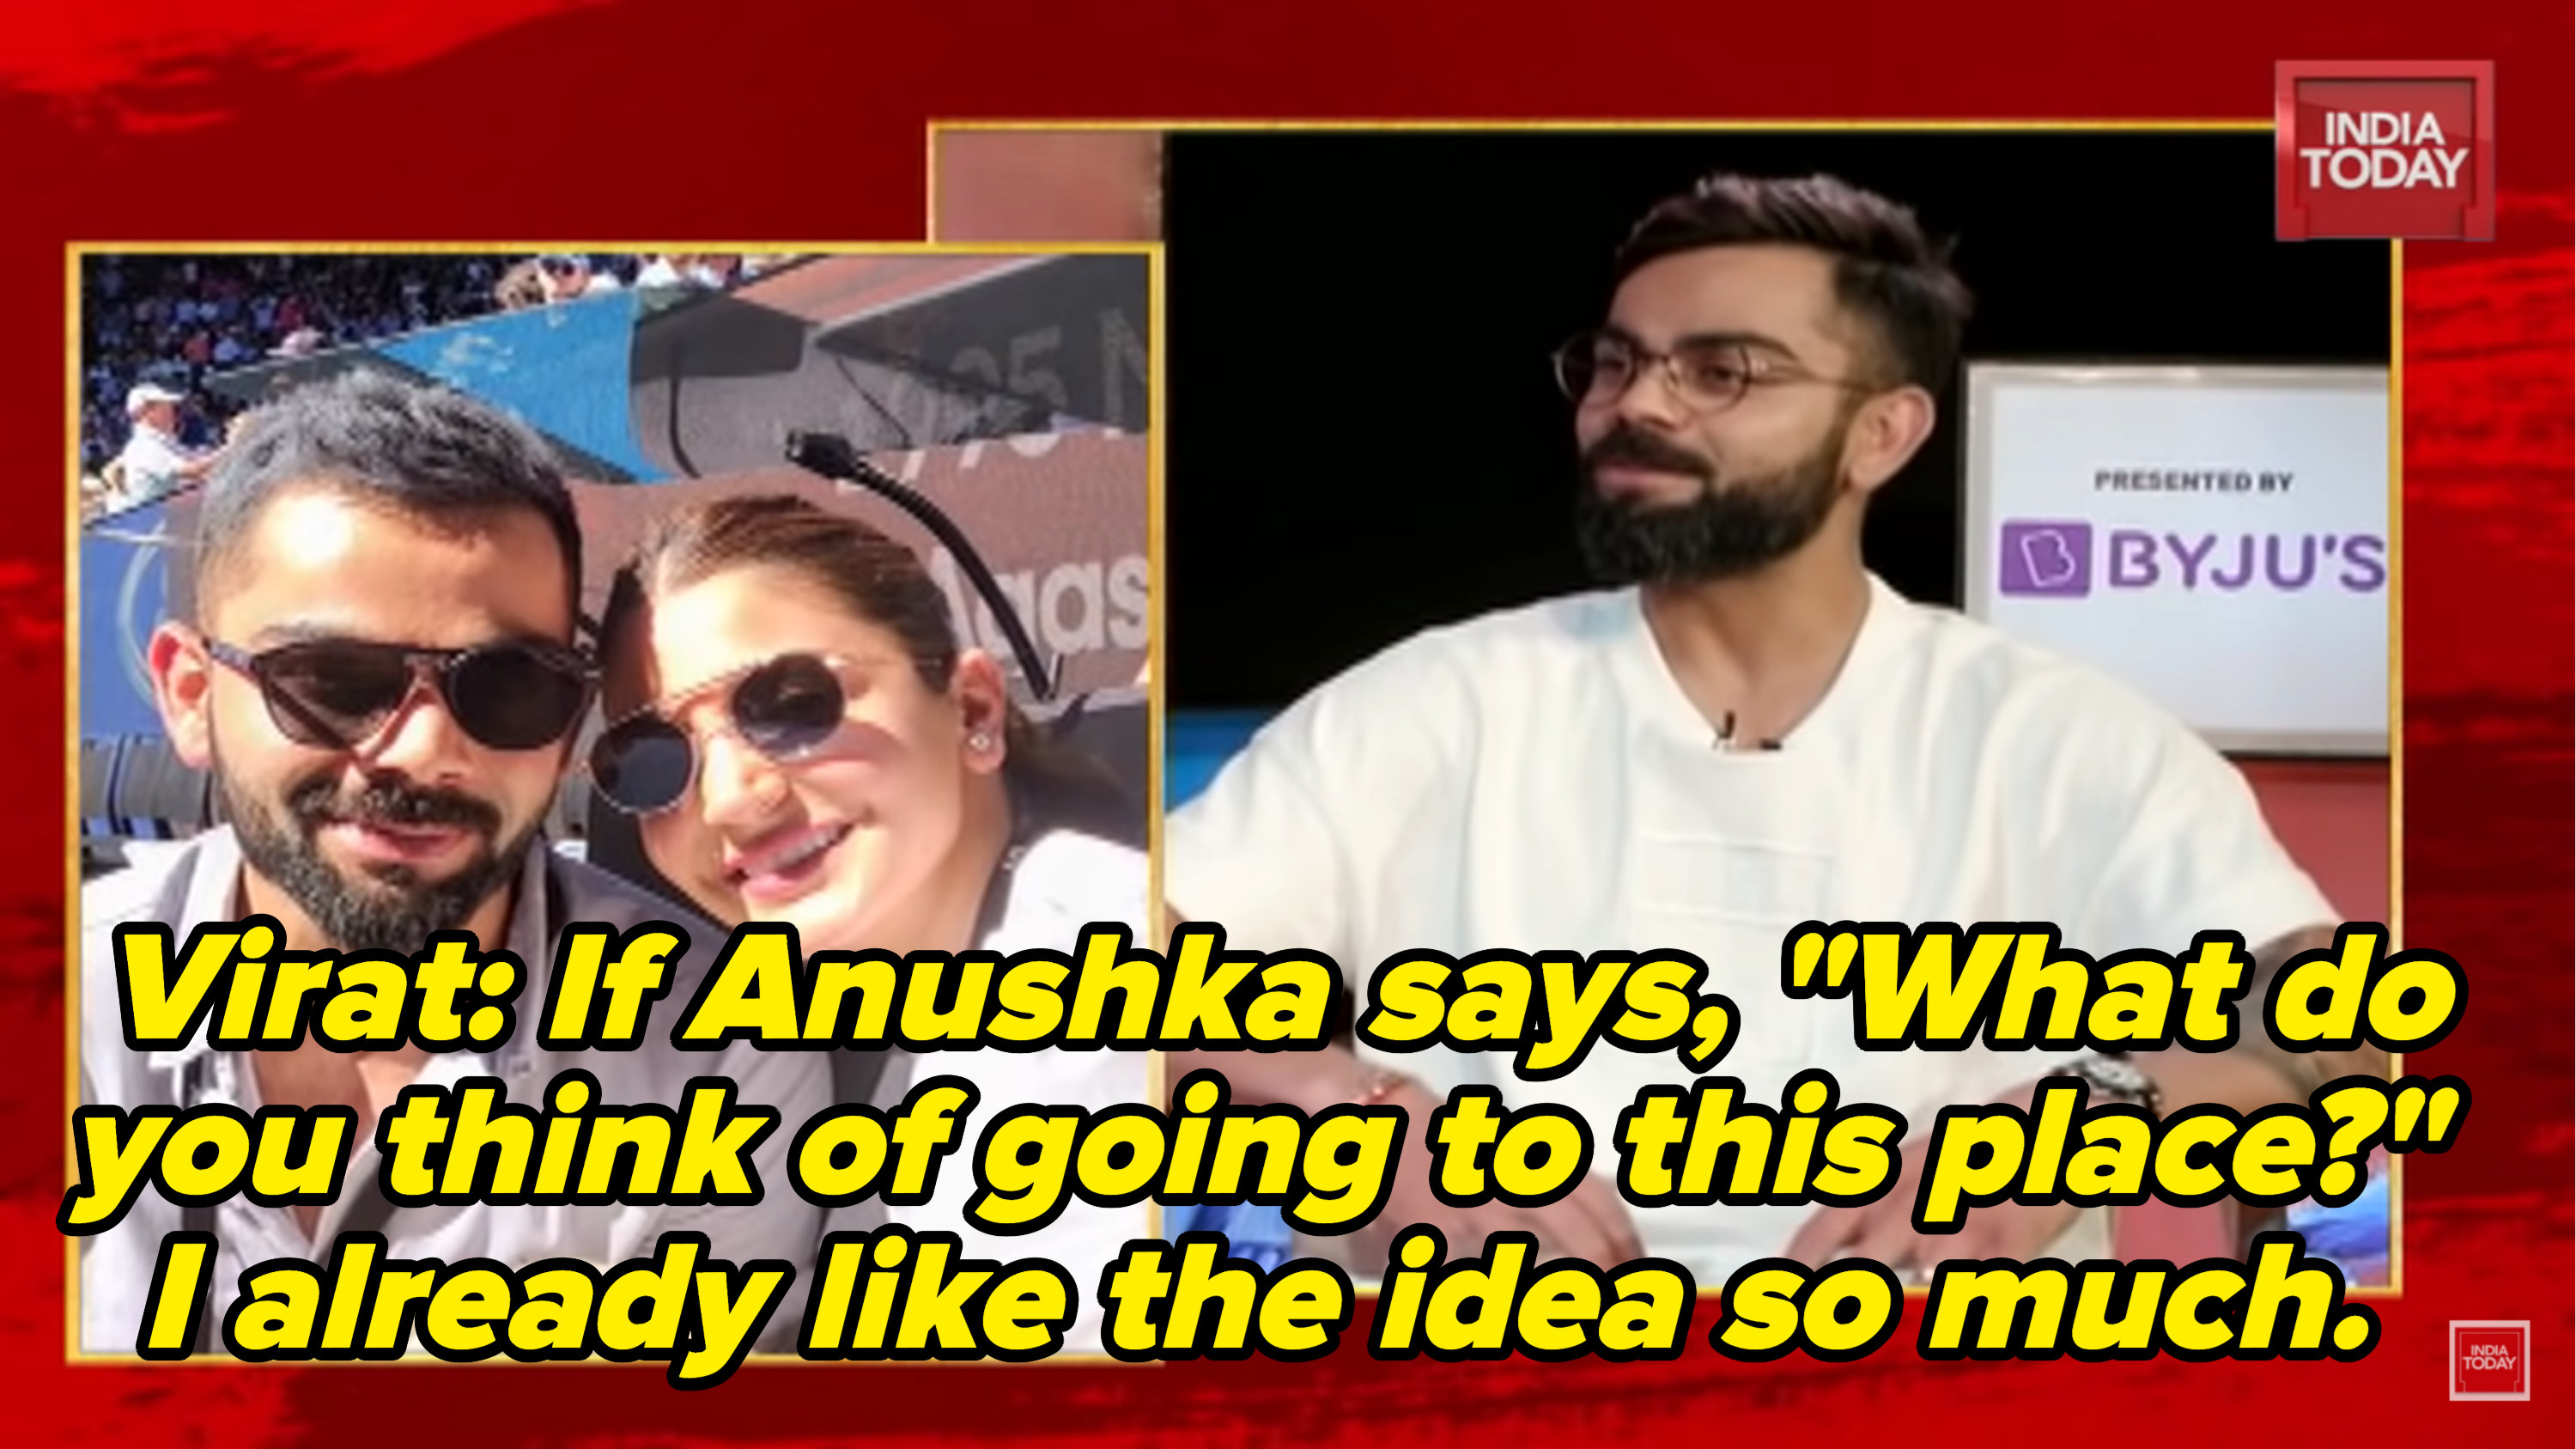 A split screen of Virat Kohli speaking and a picture of him and Anushka Sharma